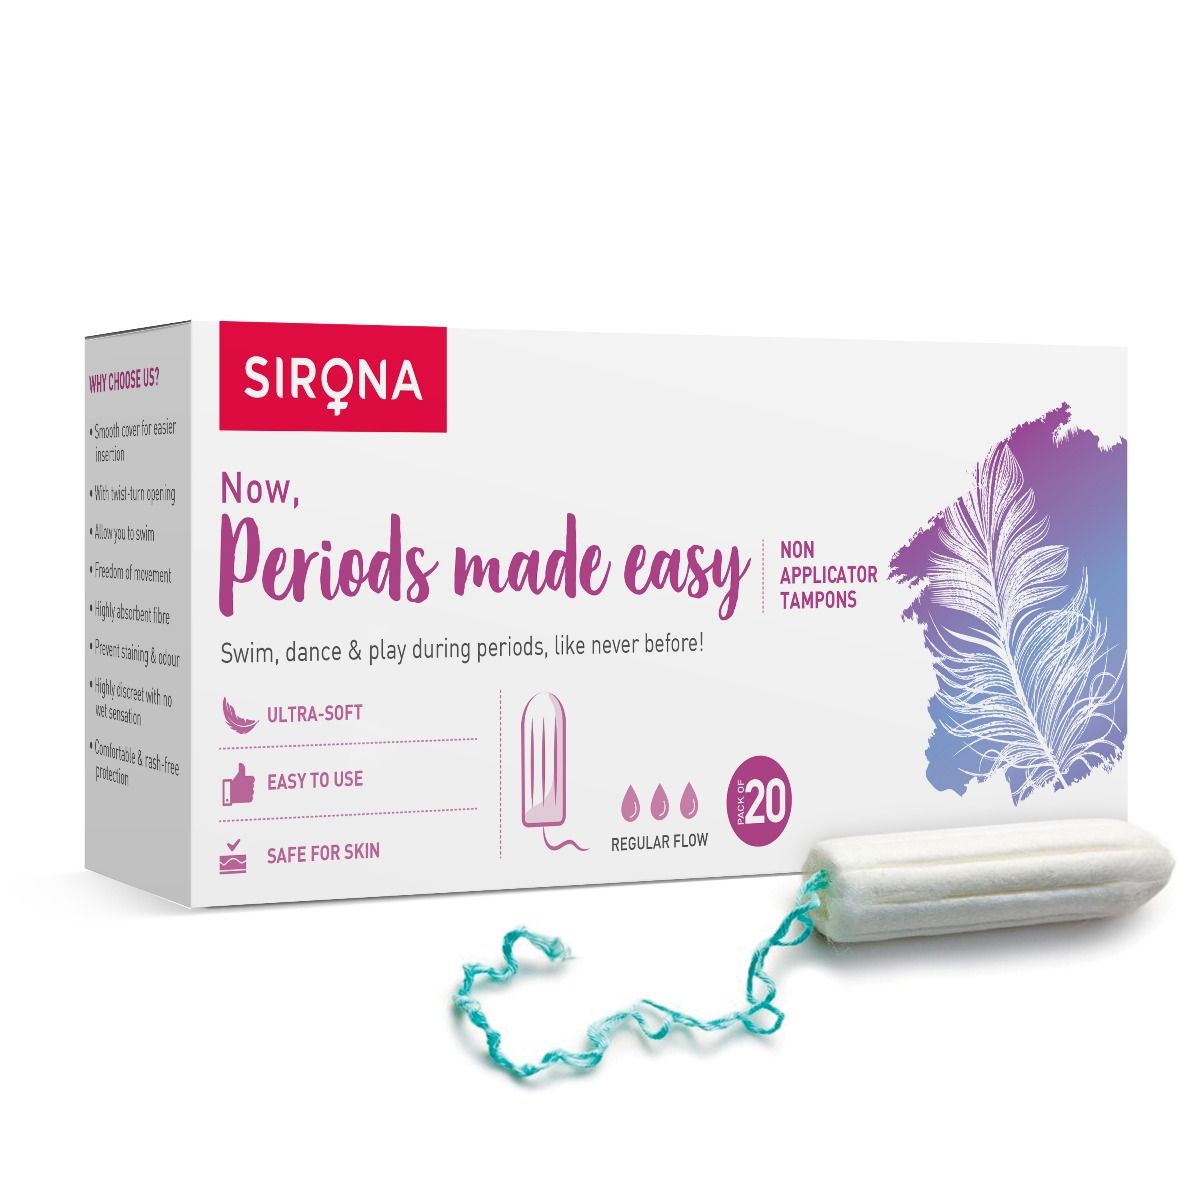 Sirona Periods Made Easy Tampons, 20 Count, Pack of 1 